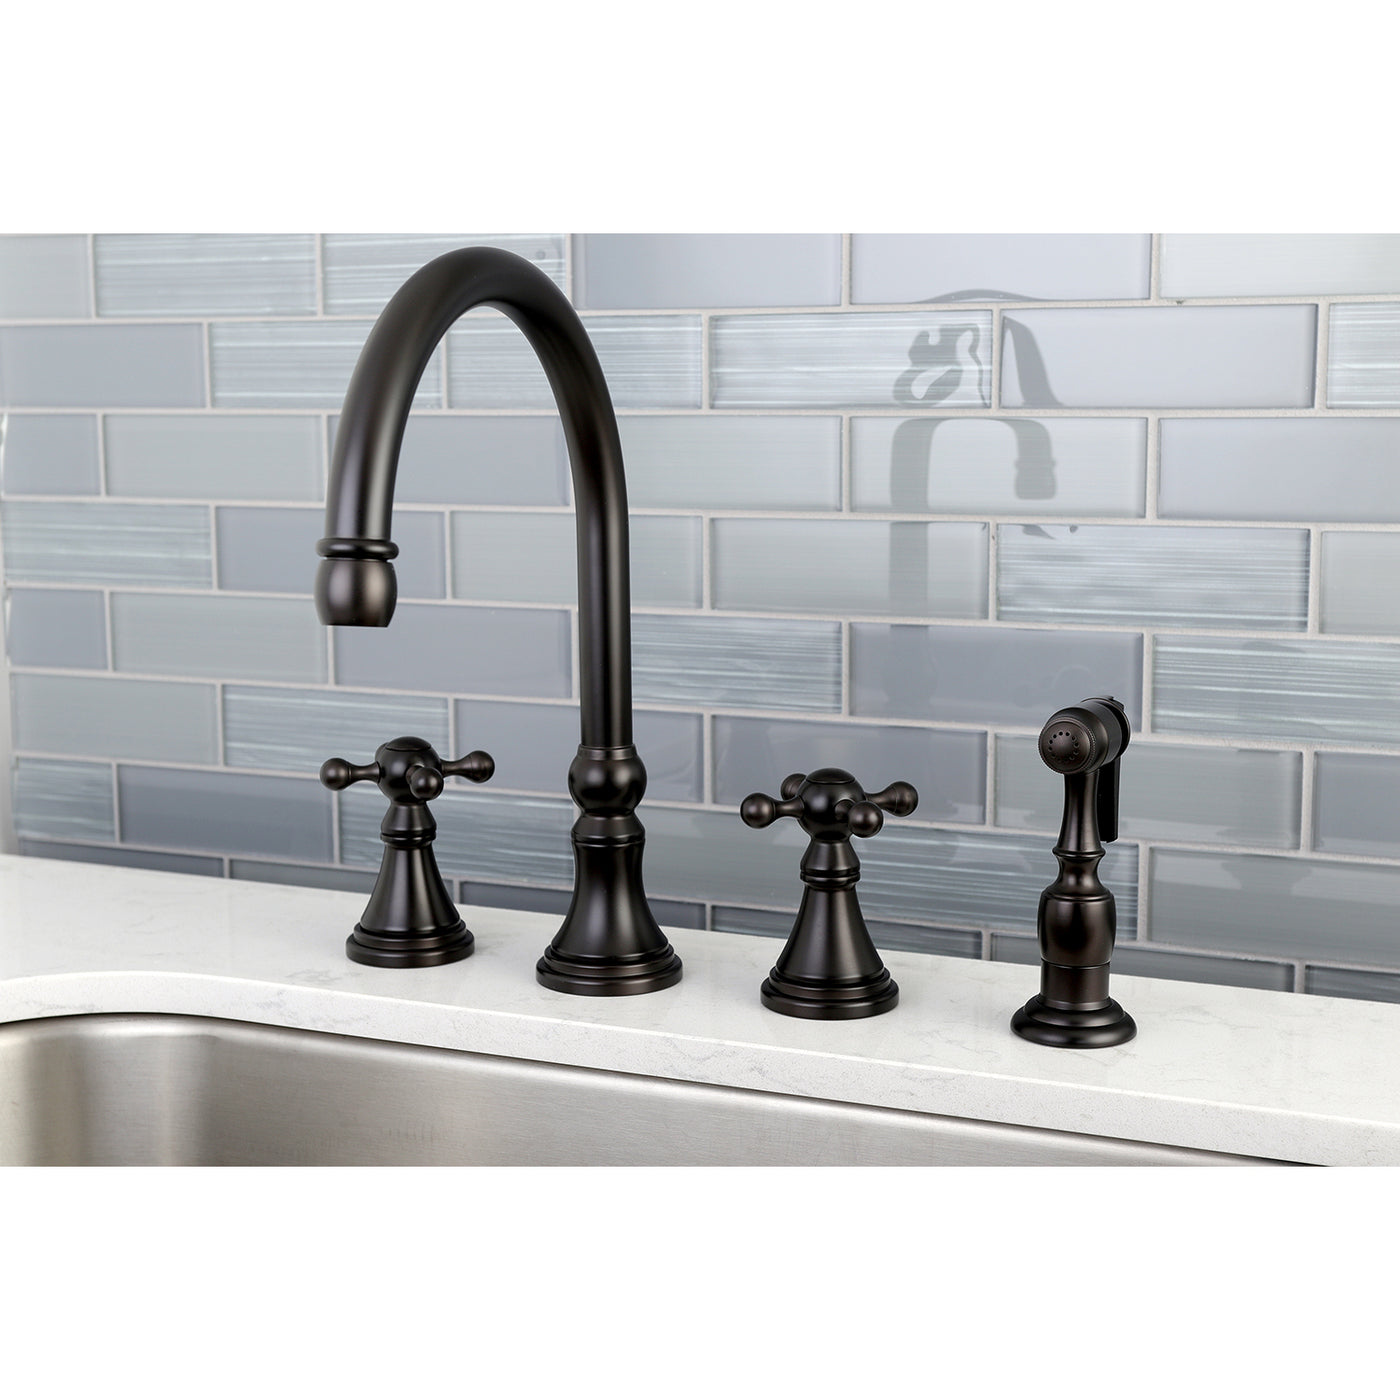 Elements of Design ES2795KXBS Widespread Kitchen Faucet with Brass Sprayer, Oil Rubbed Bronze